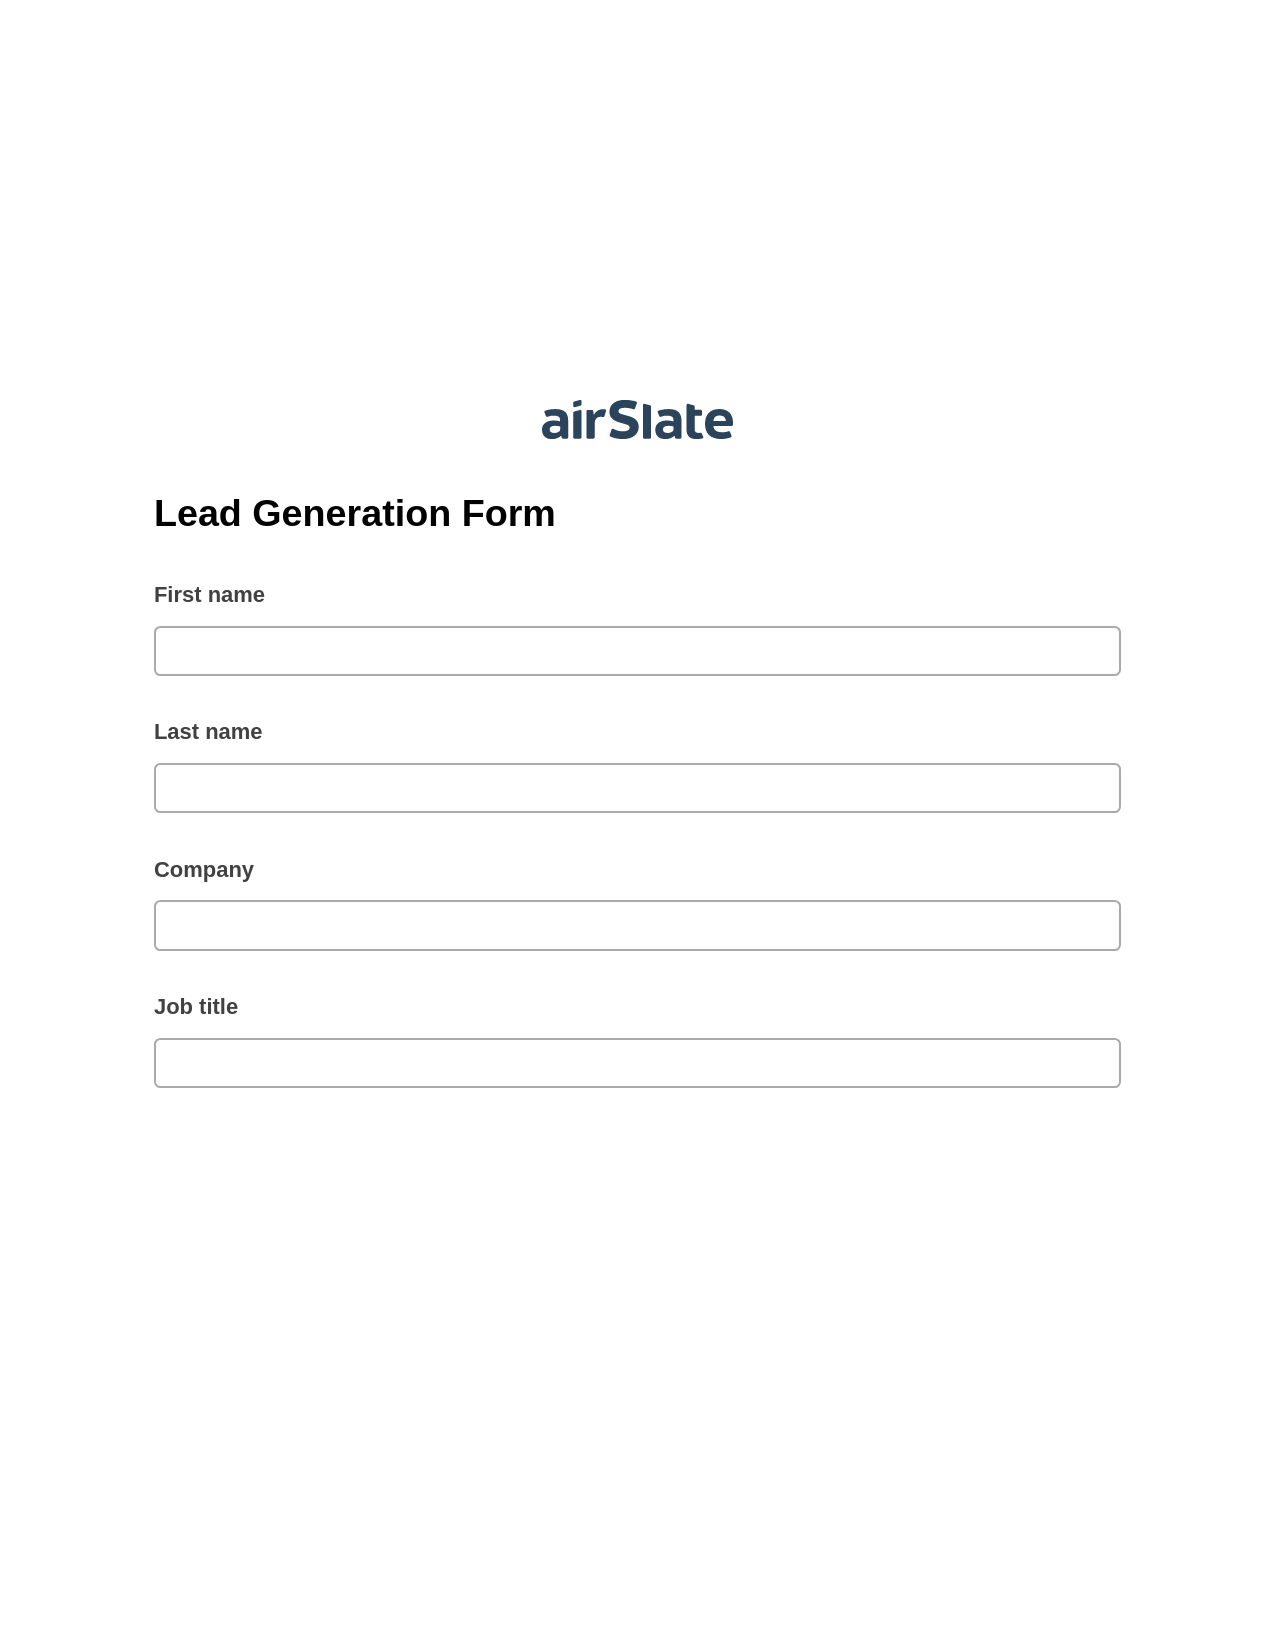 Lead Generation Form Pre-fill Dropdowns from Google Sheet Bot, Send a Slate to Salesforce Contact Bot, Archive to Google Drive Bot